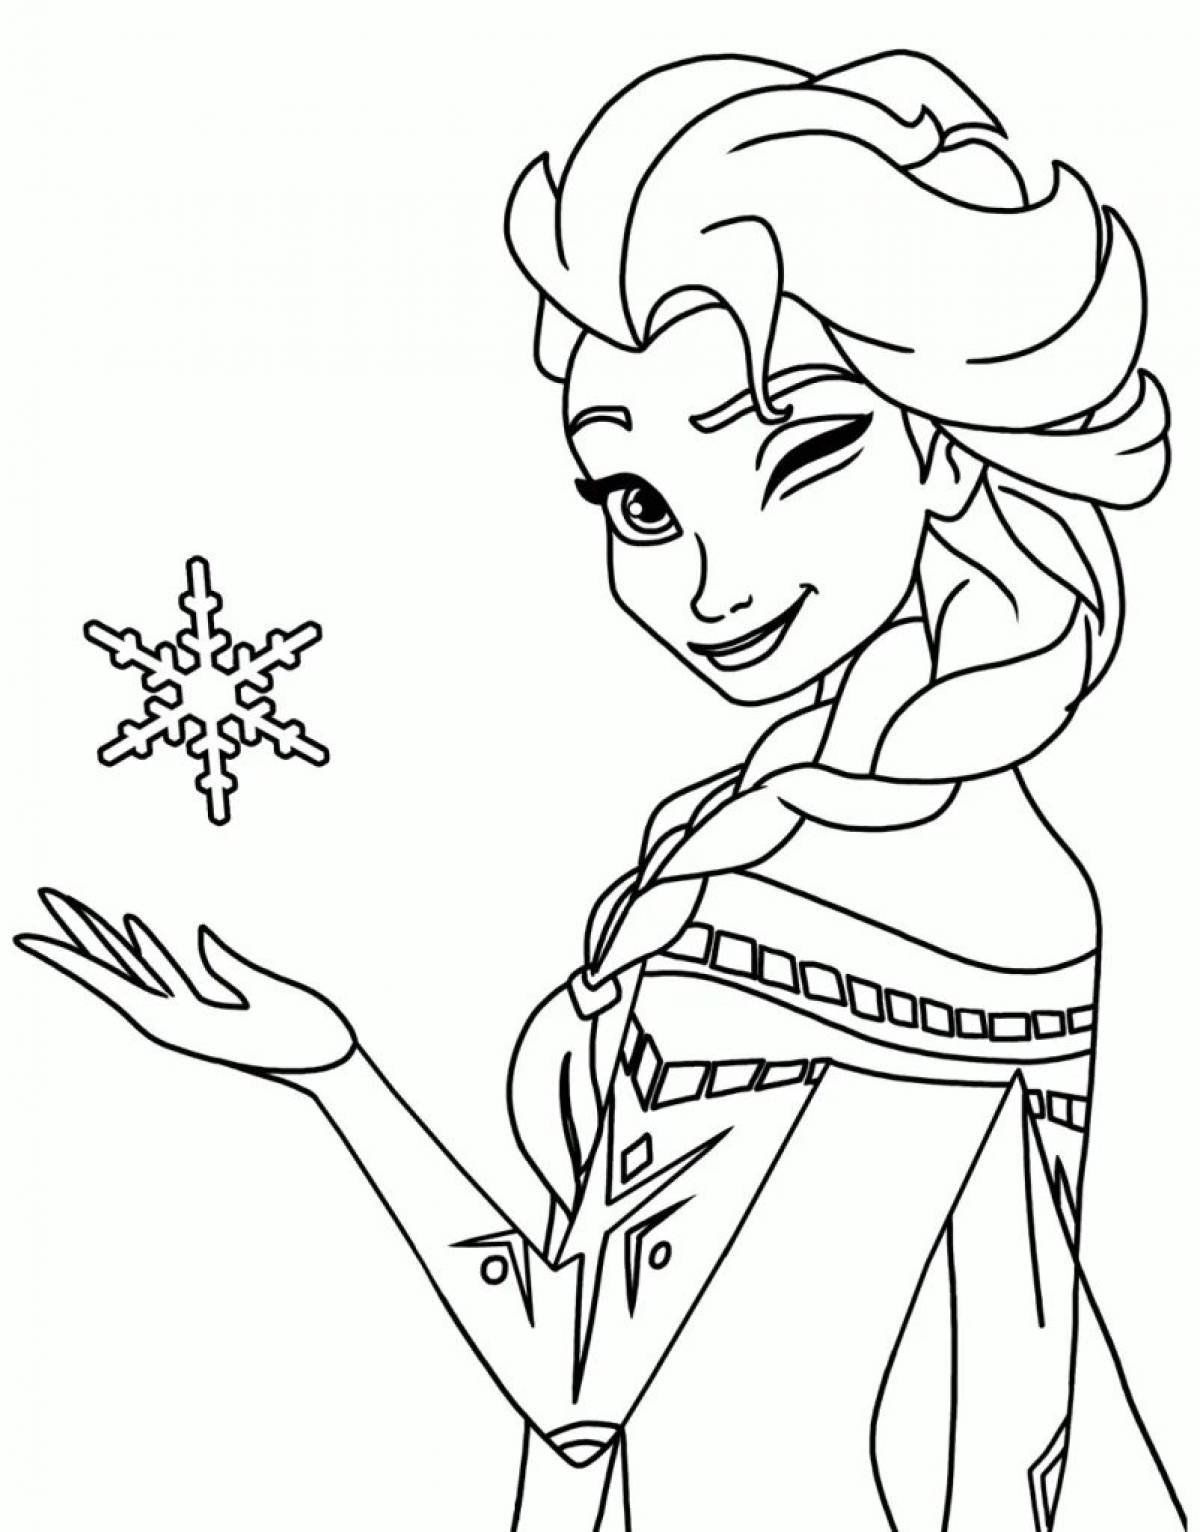 Frozen holiday coloring book for 6-7 year olds